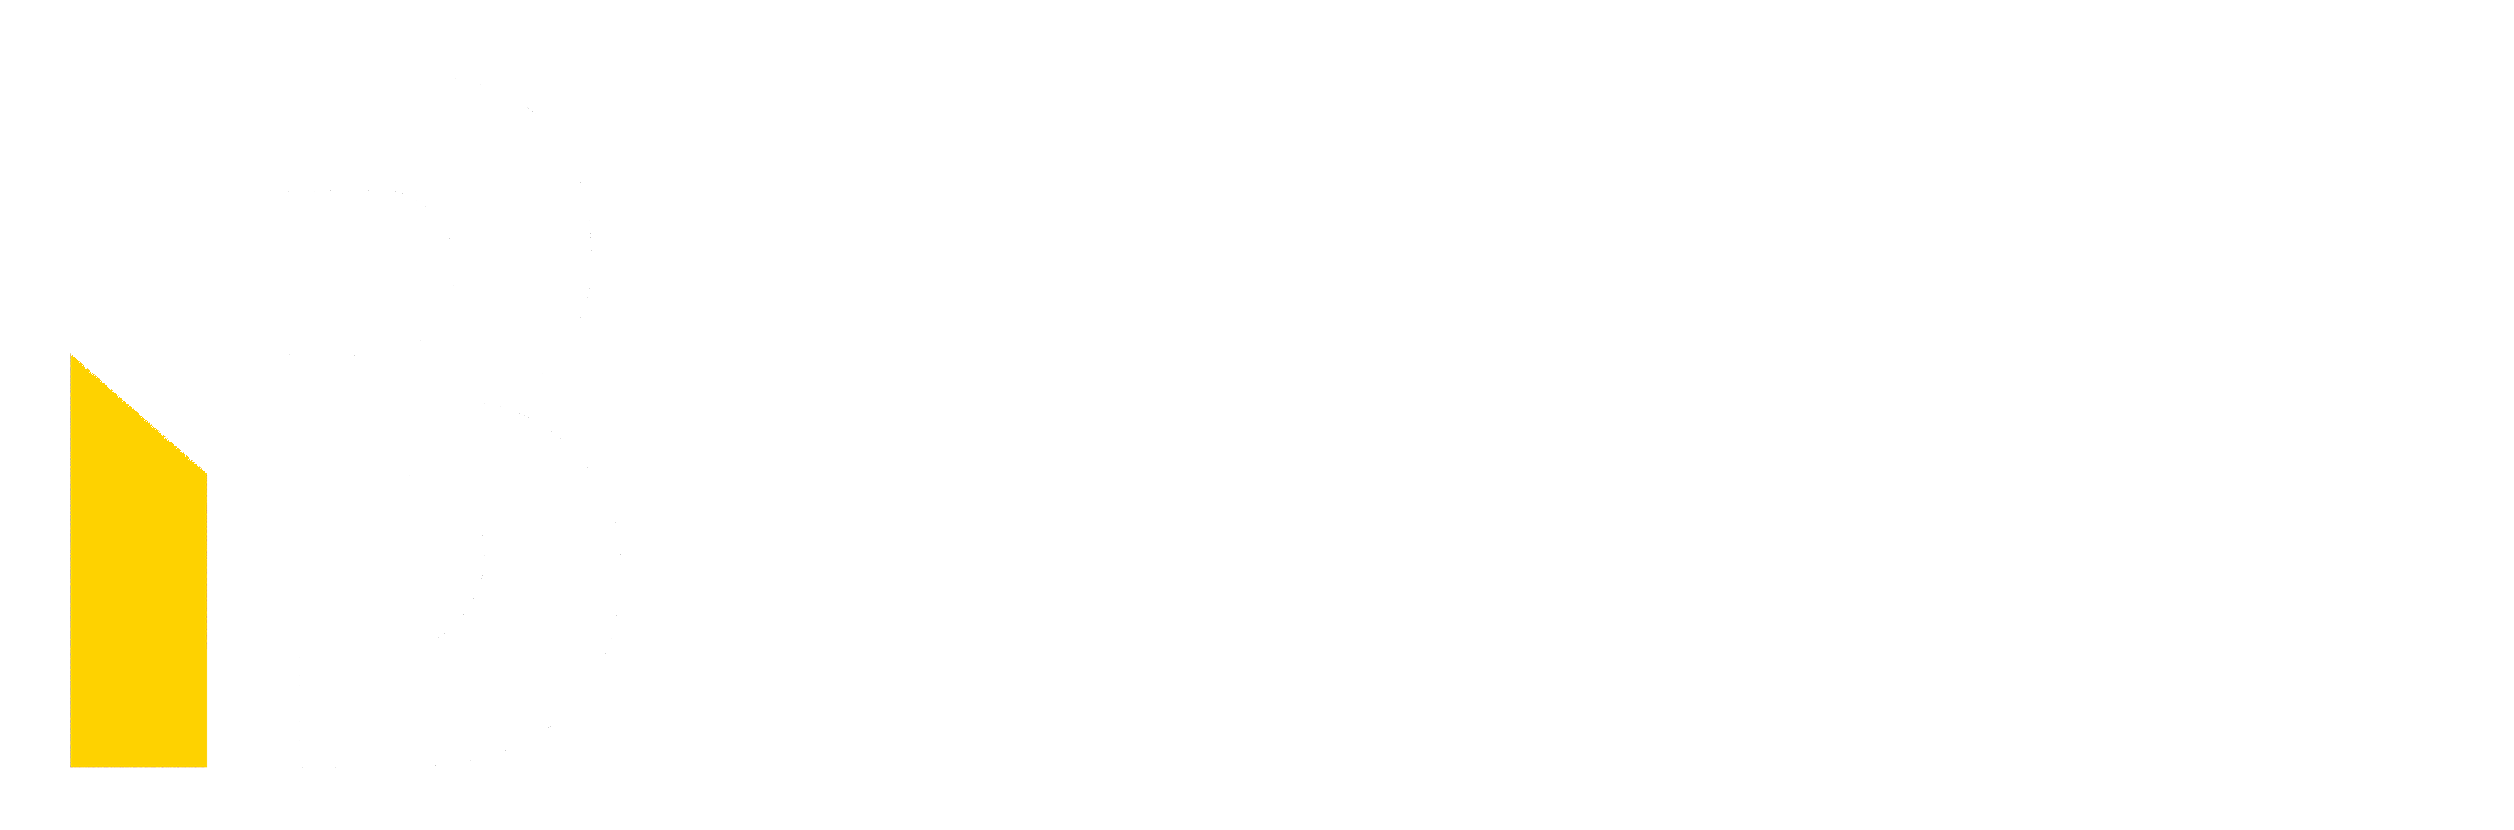 Blythe Cleaning Services in Downpatrick Logo